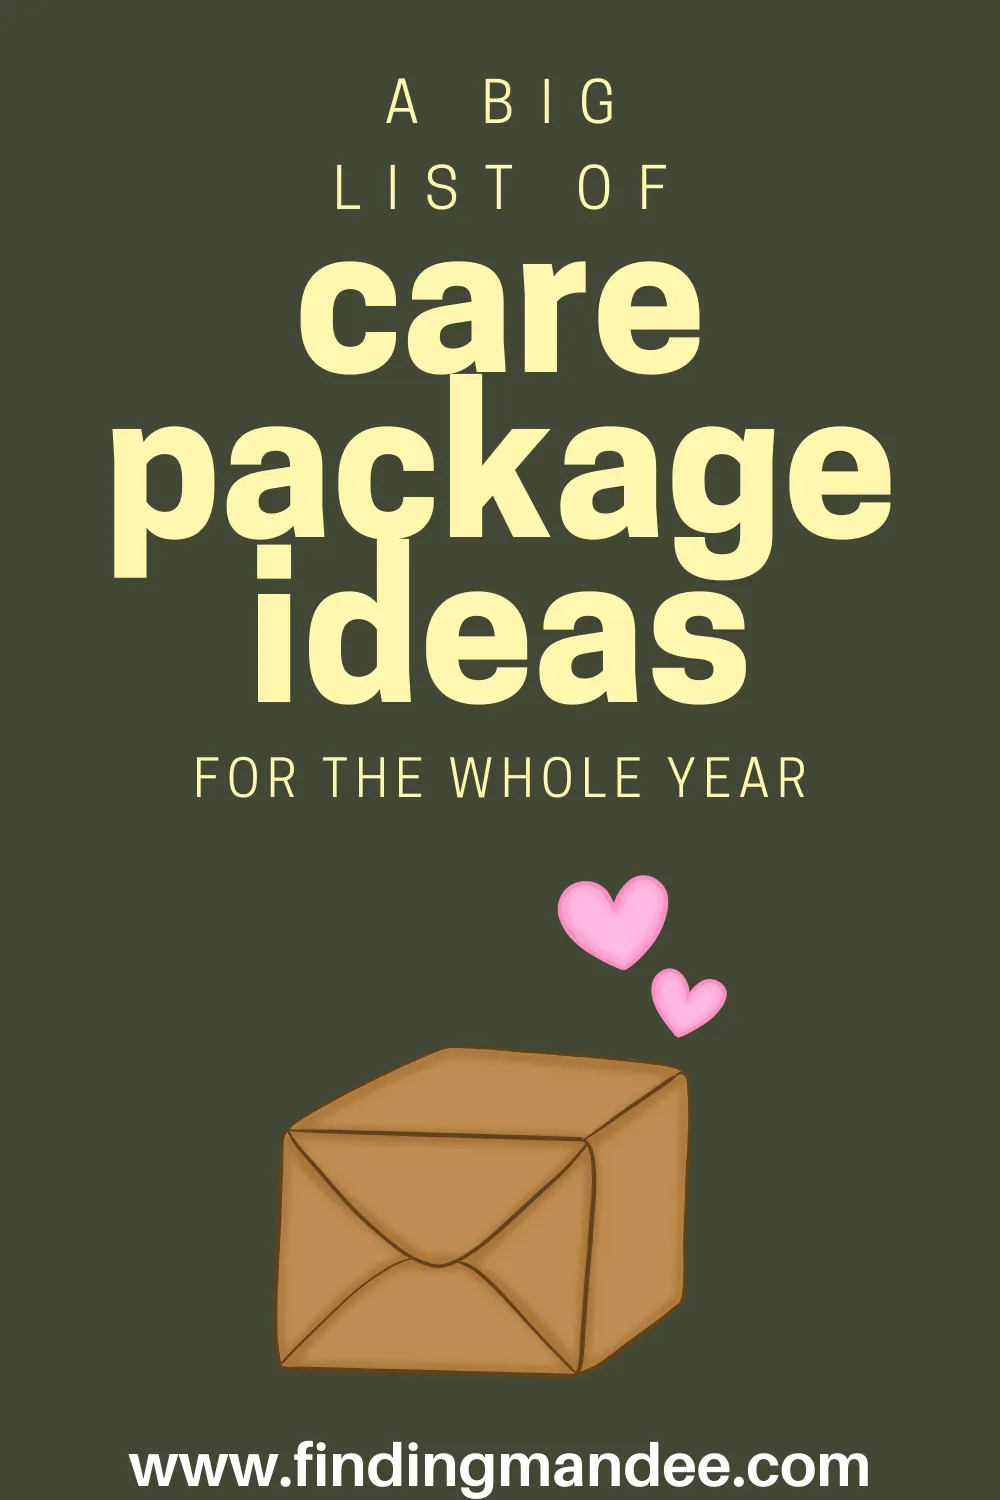 A Big List of Care Package Ideas for the Whole Year | Finding Mandee